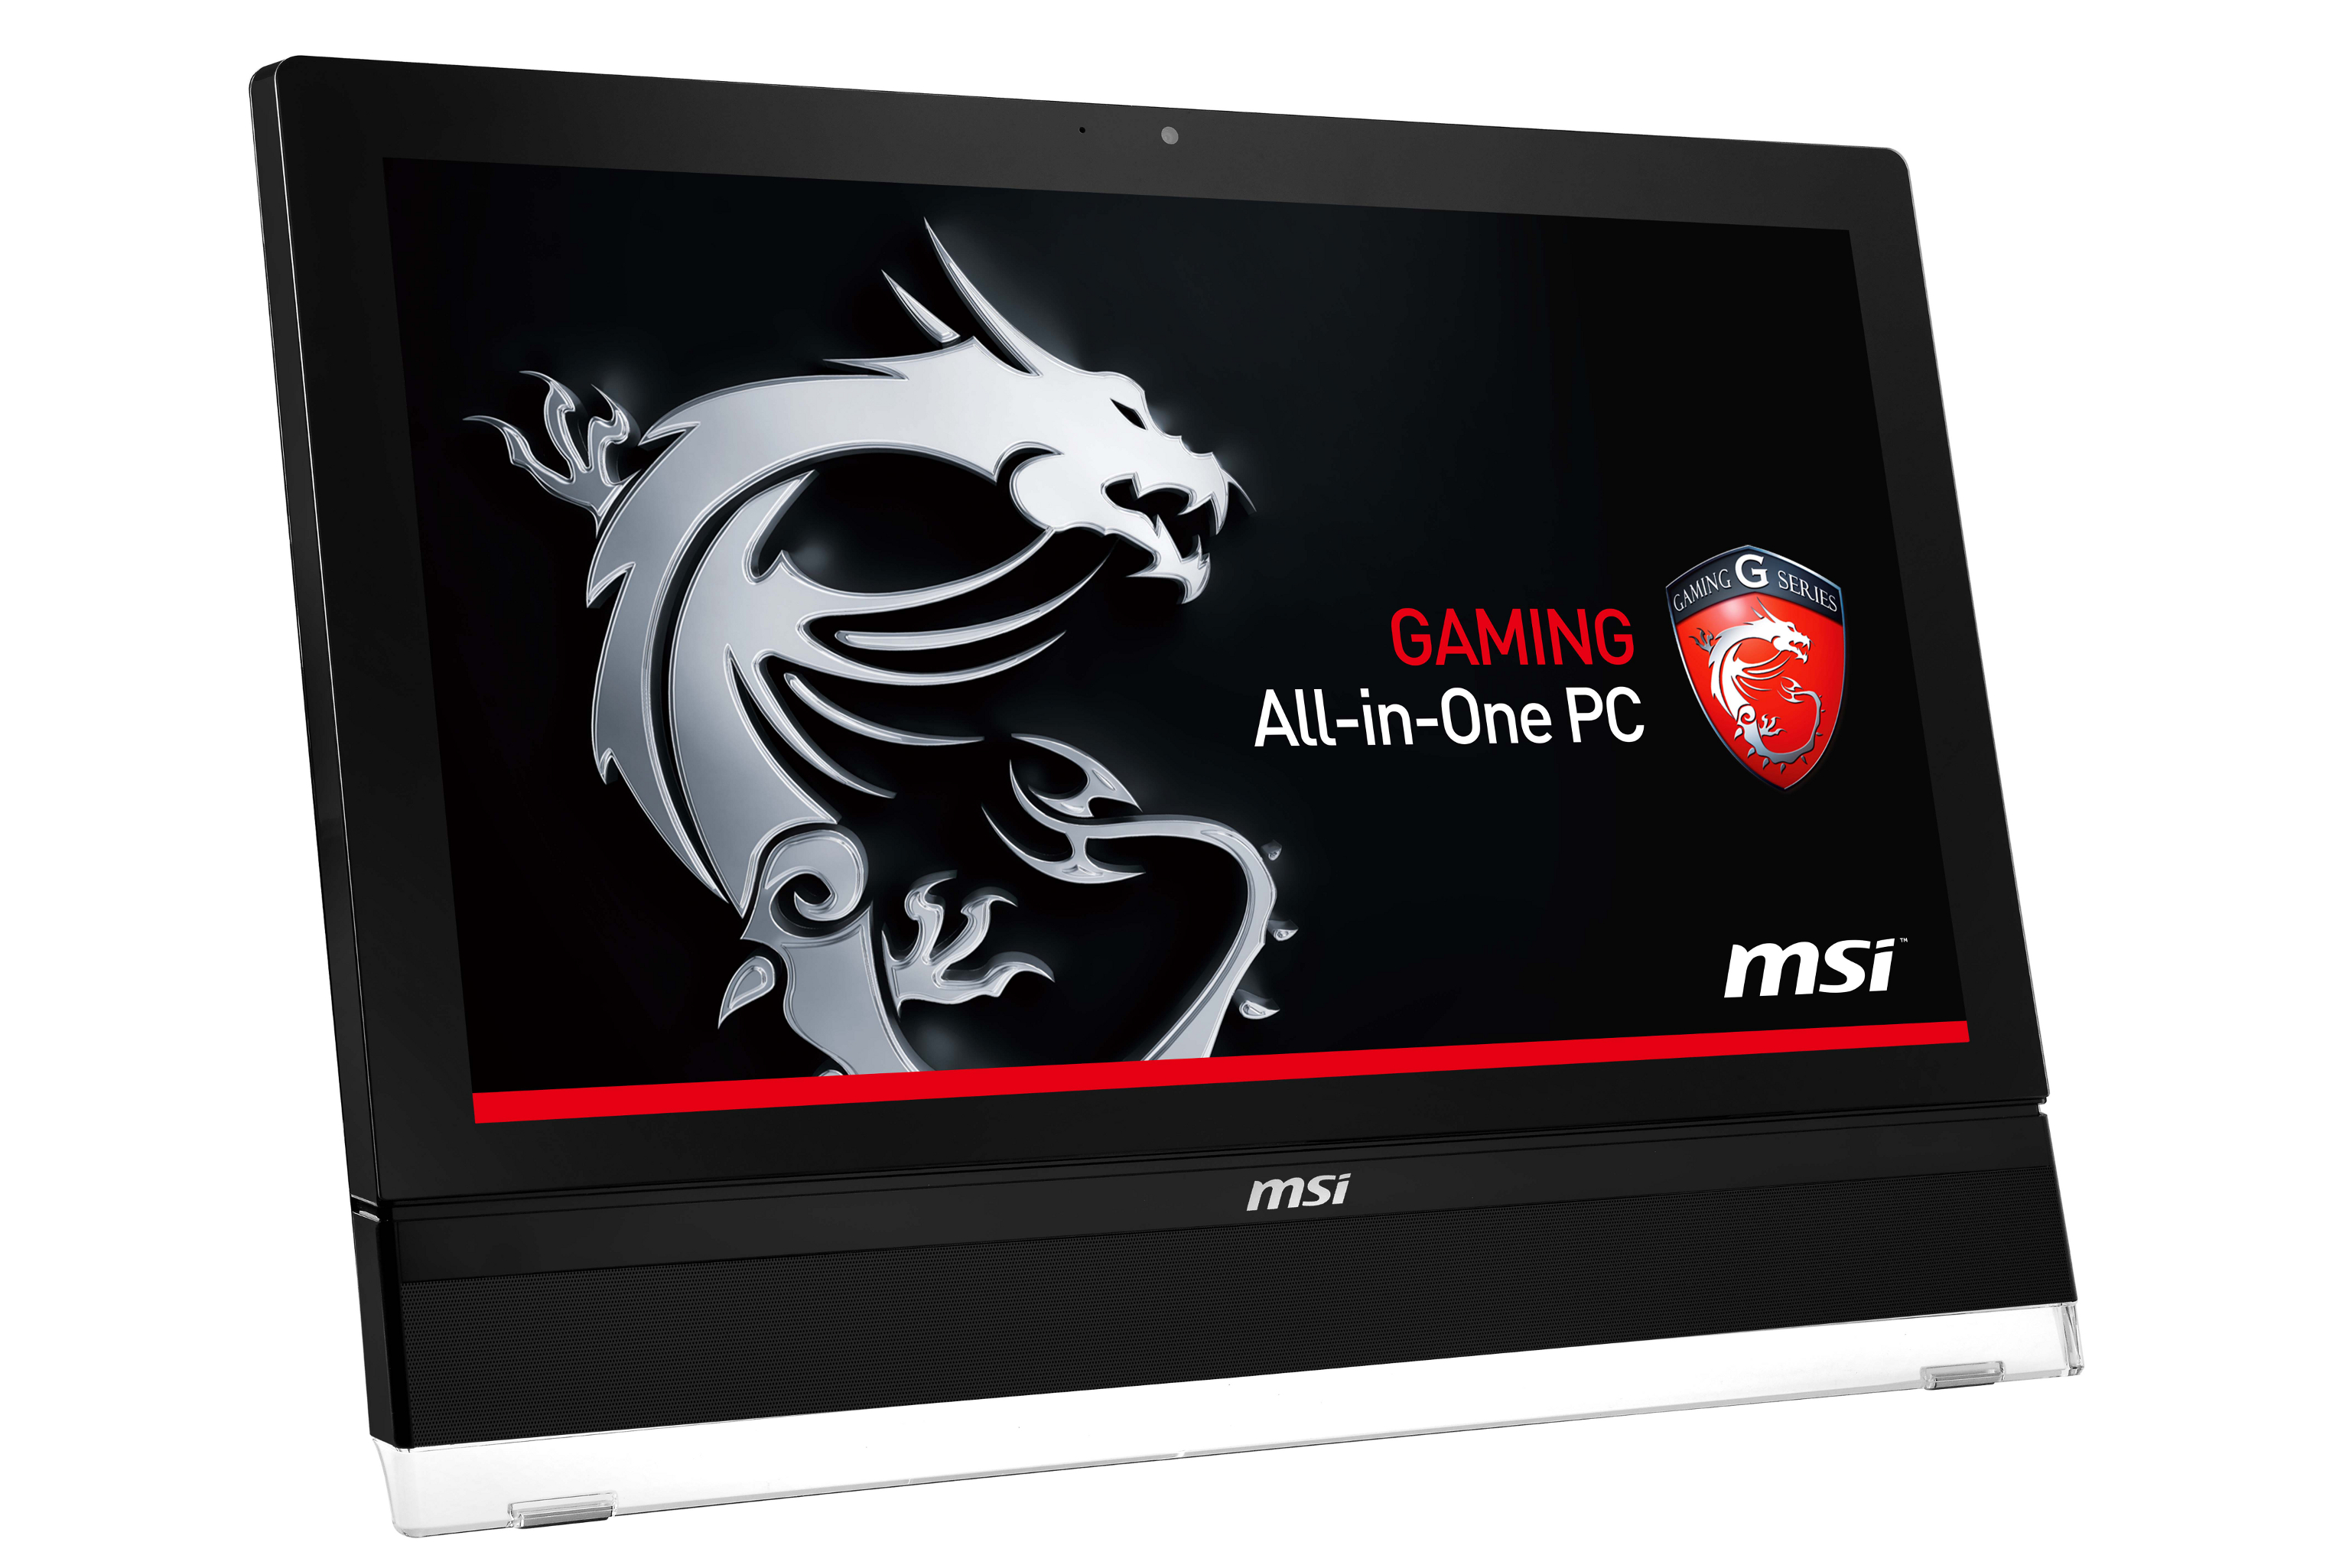 MSI: gaminowy All-in-One